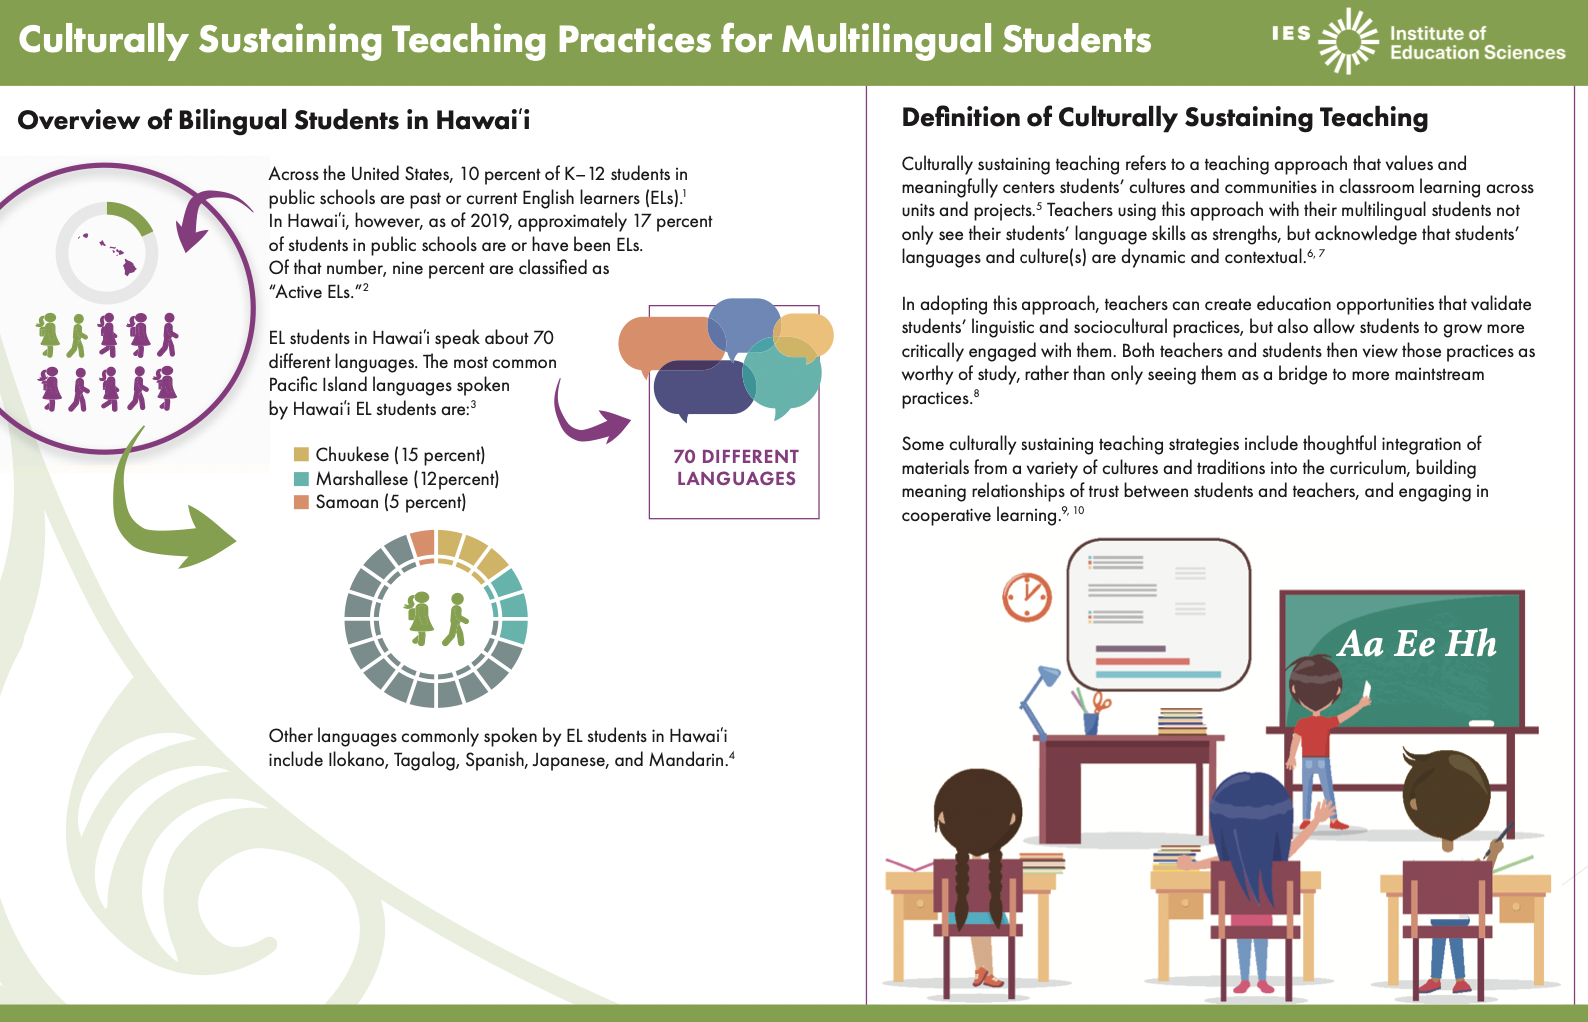 Culturally Sustaining Teaching Practices for Multilingual Students